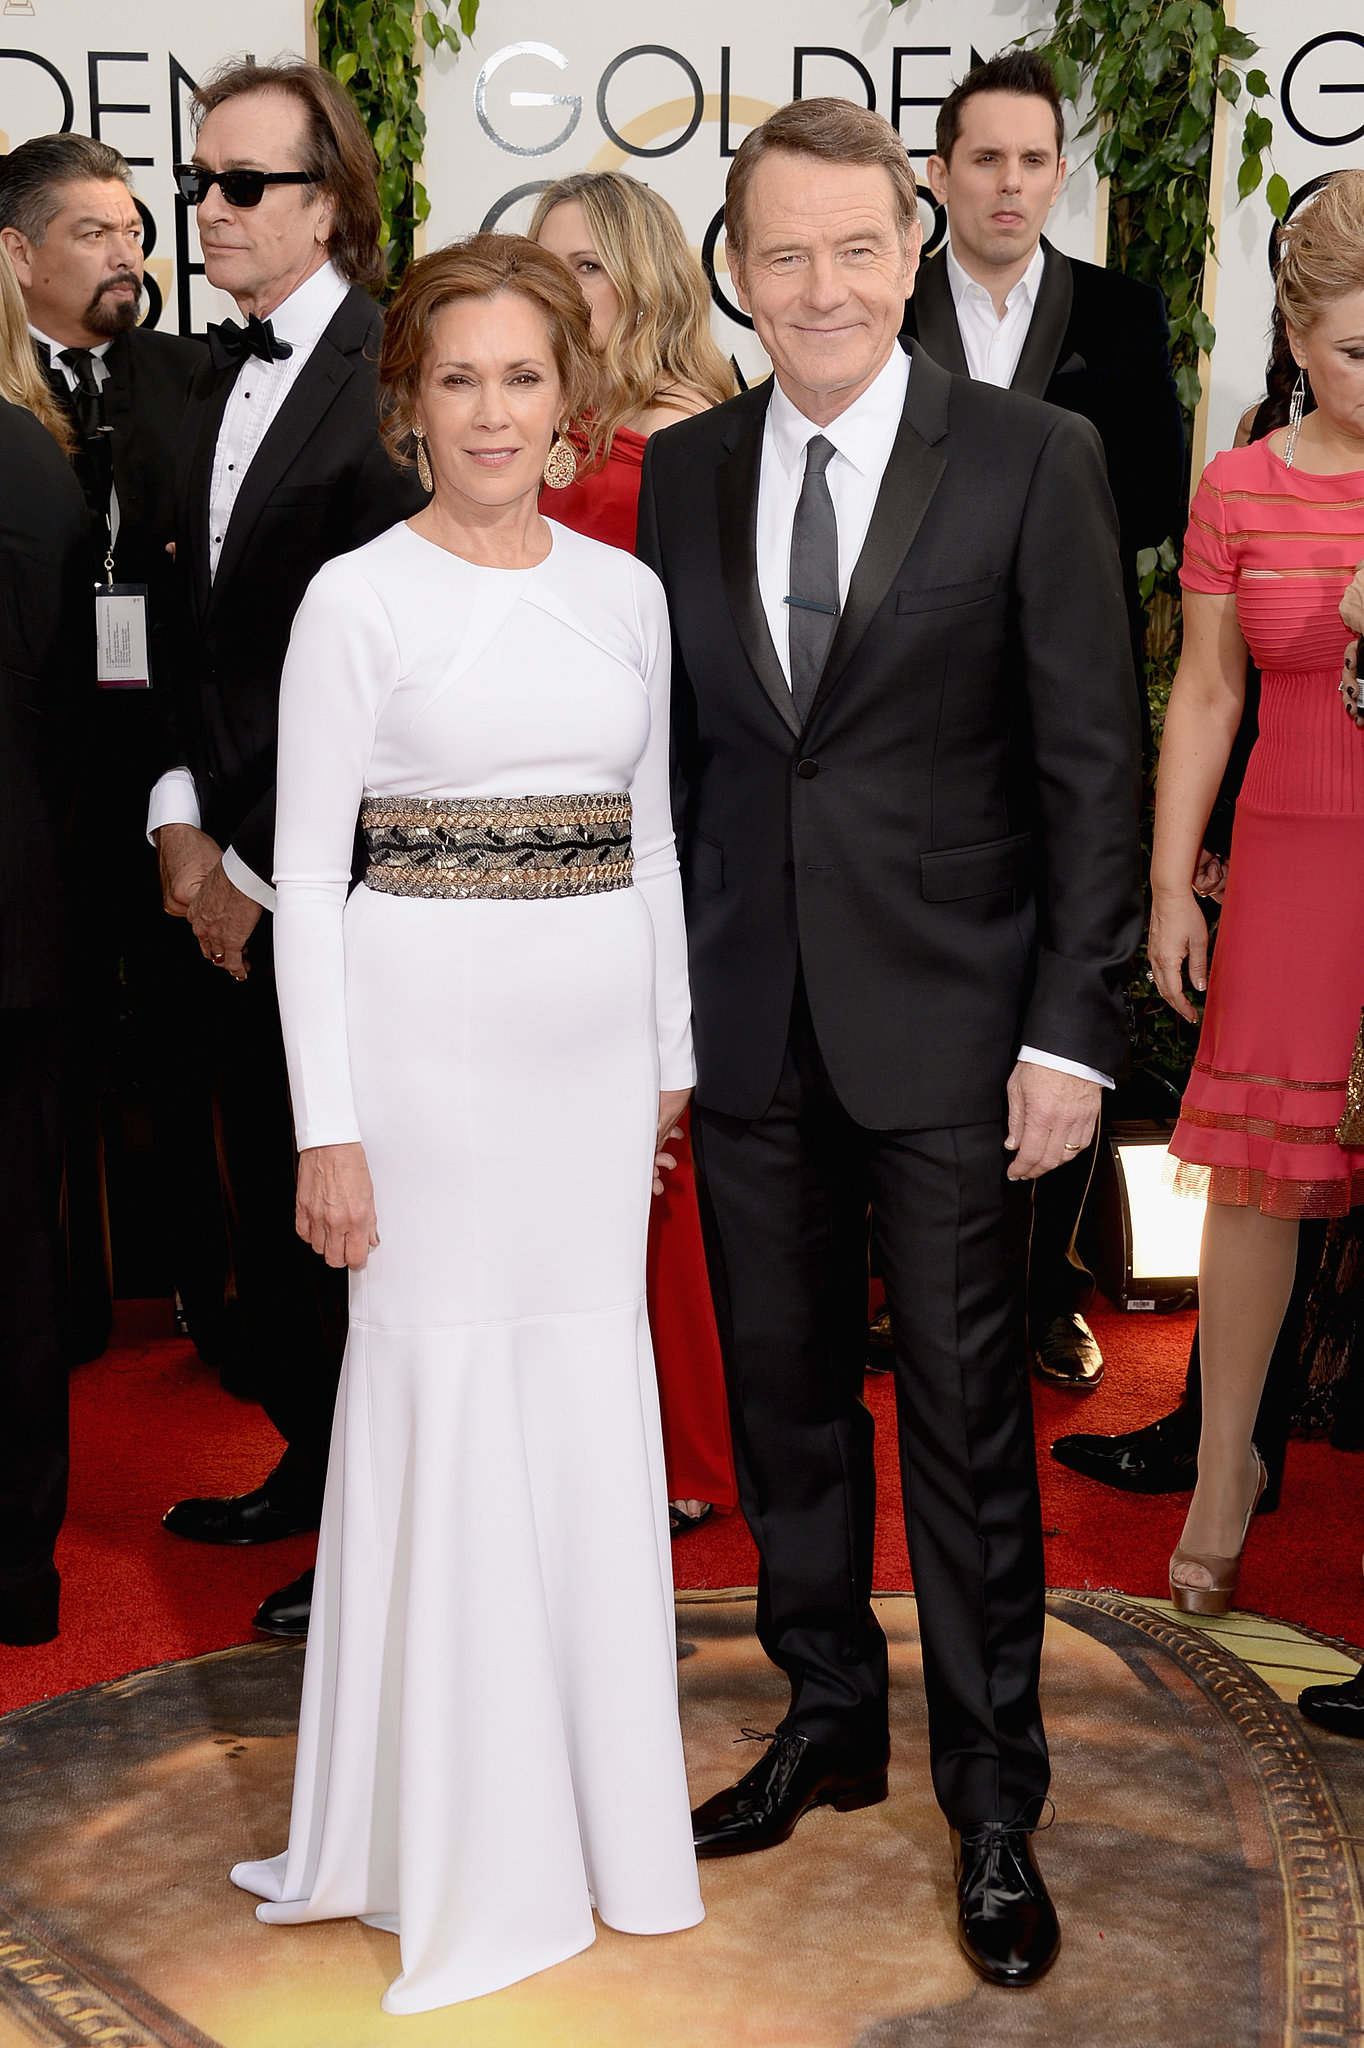 Bryan Cranston and his wife, Robin Dearden, walked the red carpet It